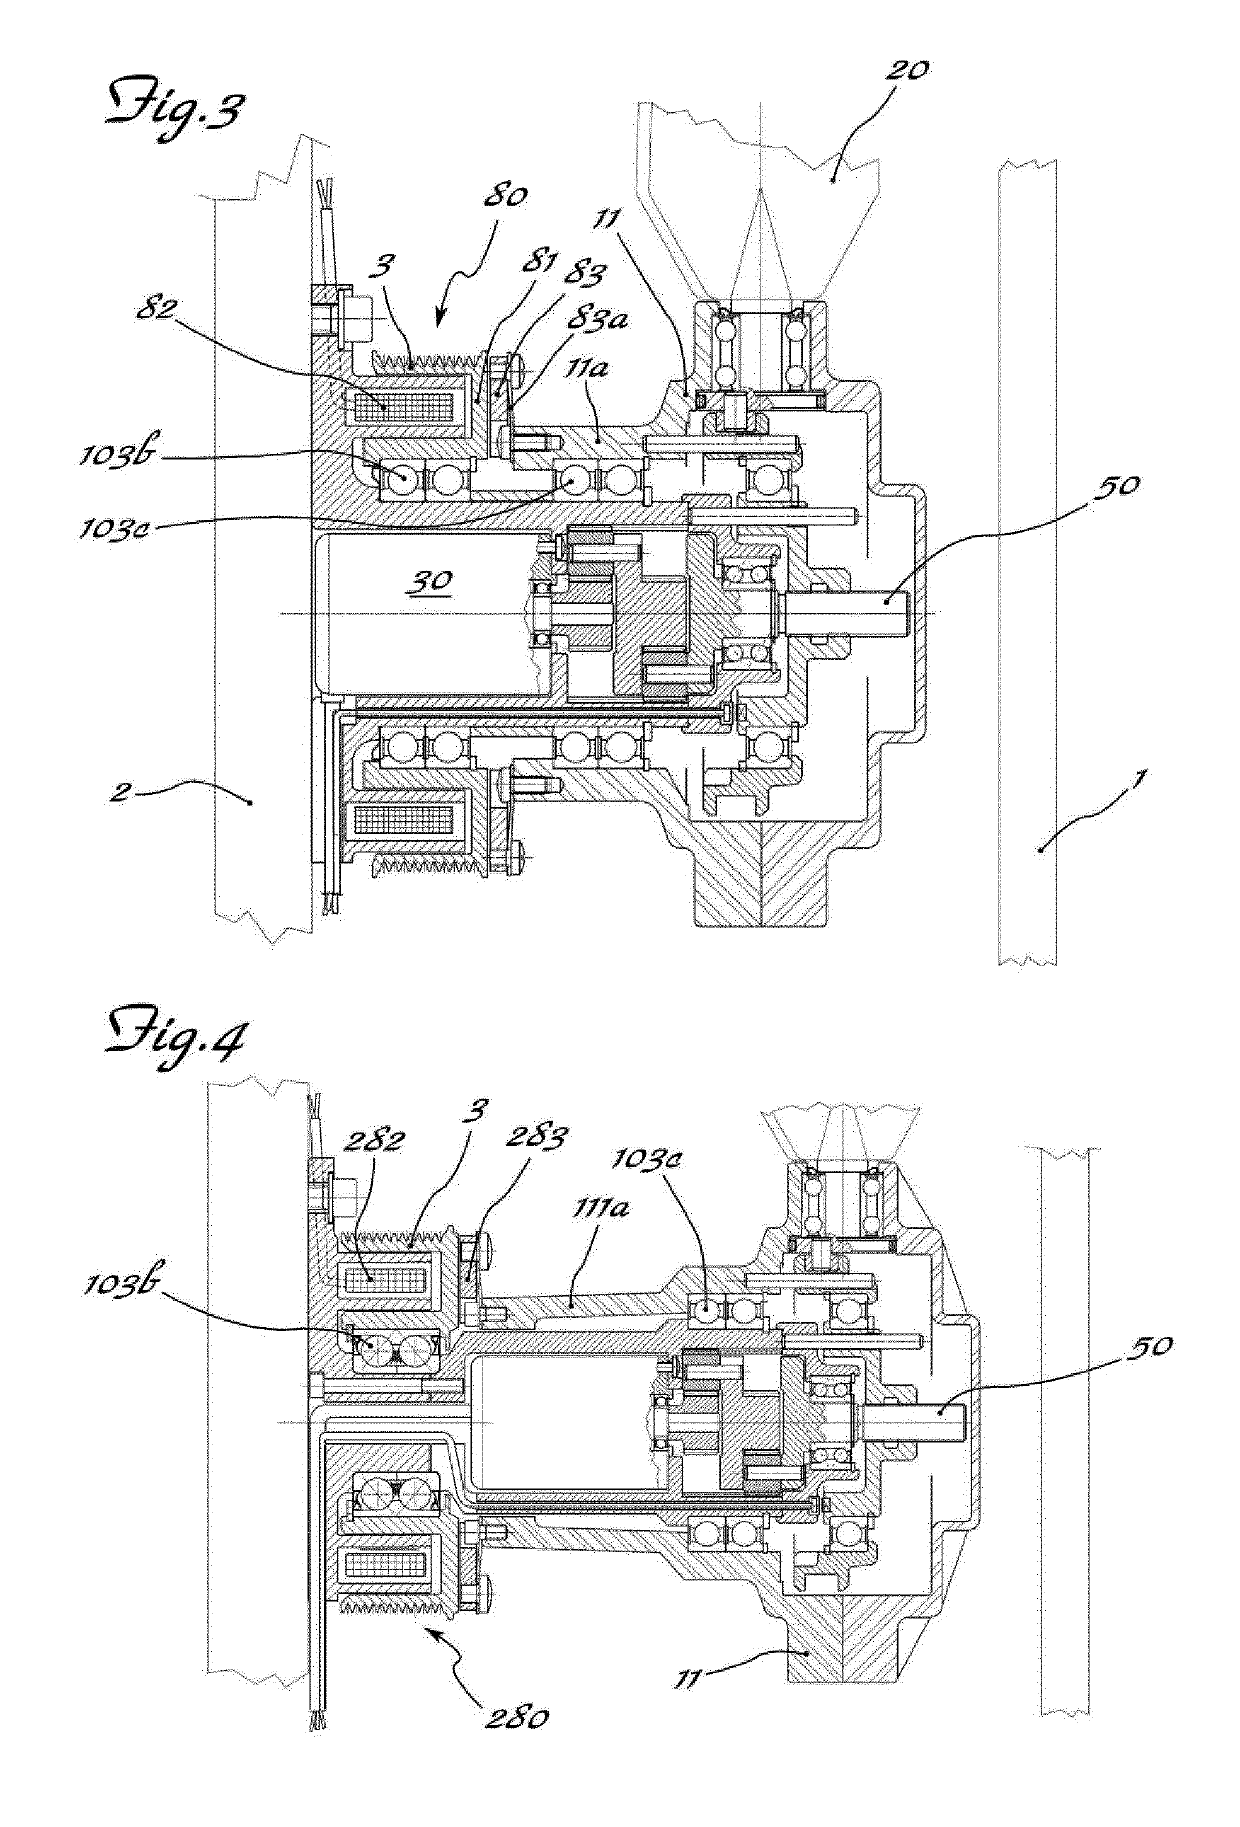 Apparatus for actuating and controlling the rotation of blades of fans for cooling the coolant in machines/vehicles